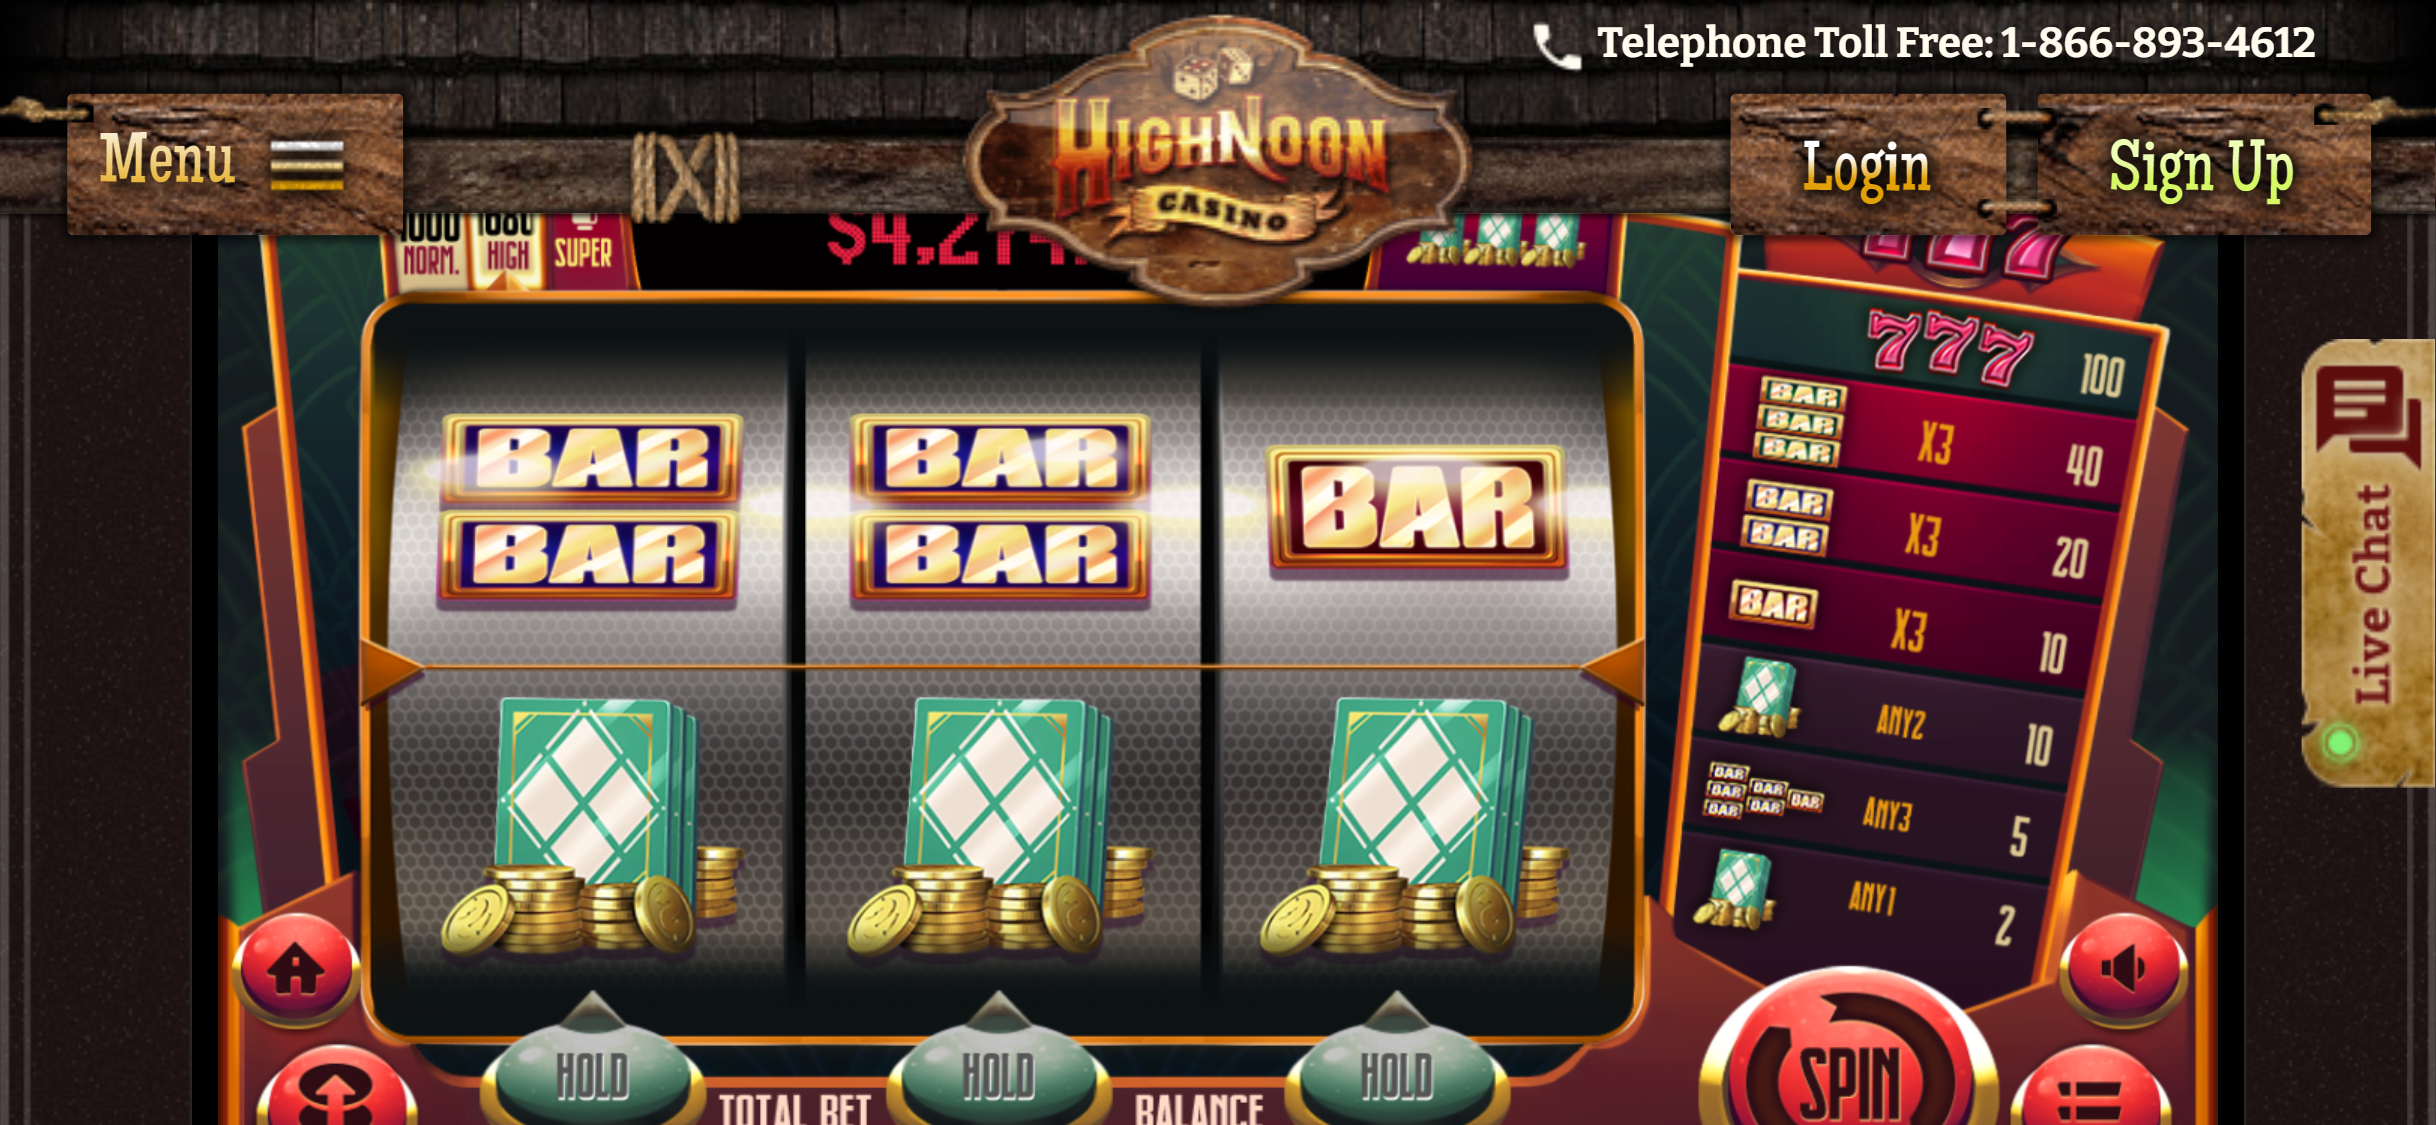 High Noon Casino Mobile Slot Games Review